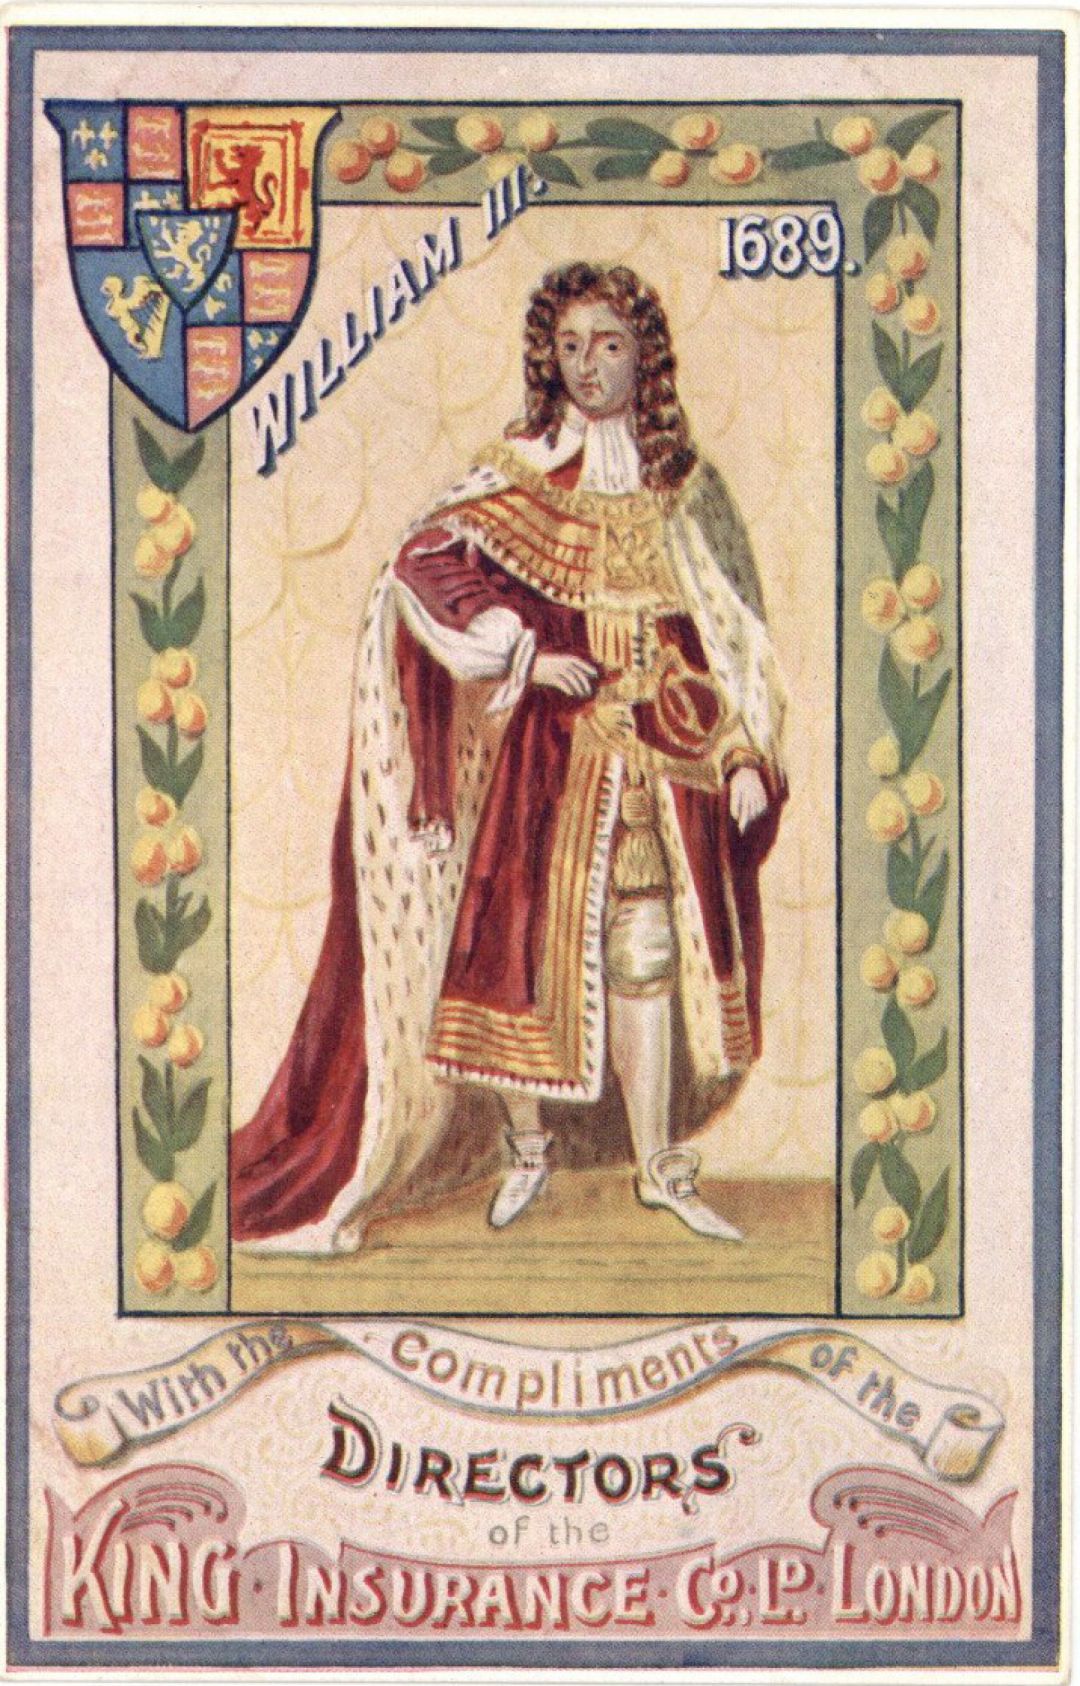 Post Card Ad for King Insurance Co. Ltd. dated 1689 -  Insurance